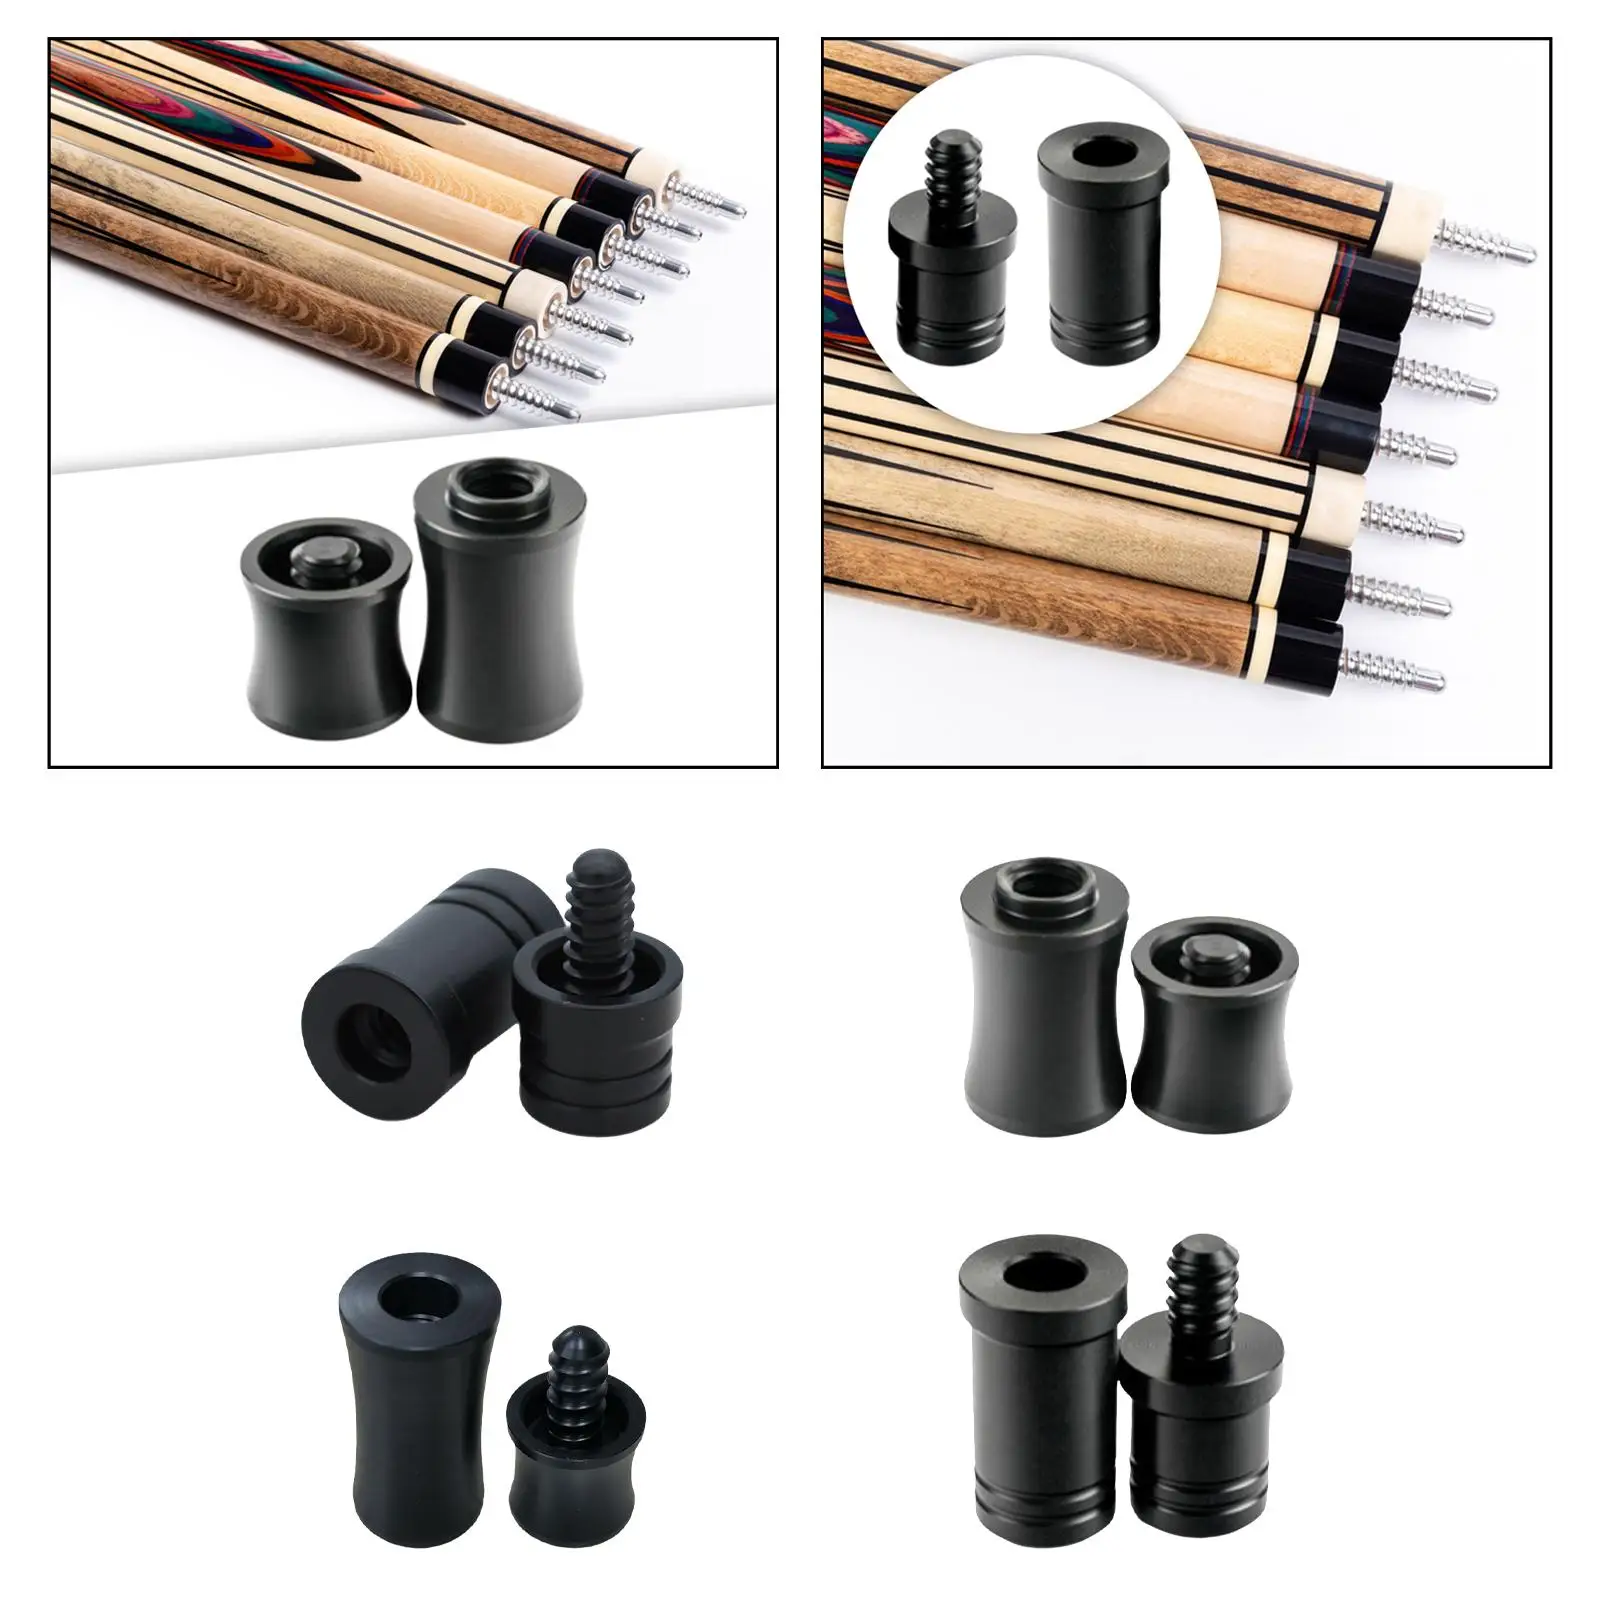 Billiard Cue Joint Protector Protect Thread Joint Billiard Cue Joint Cap Protect